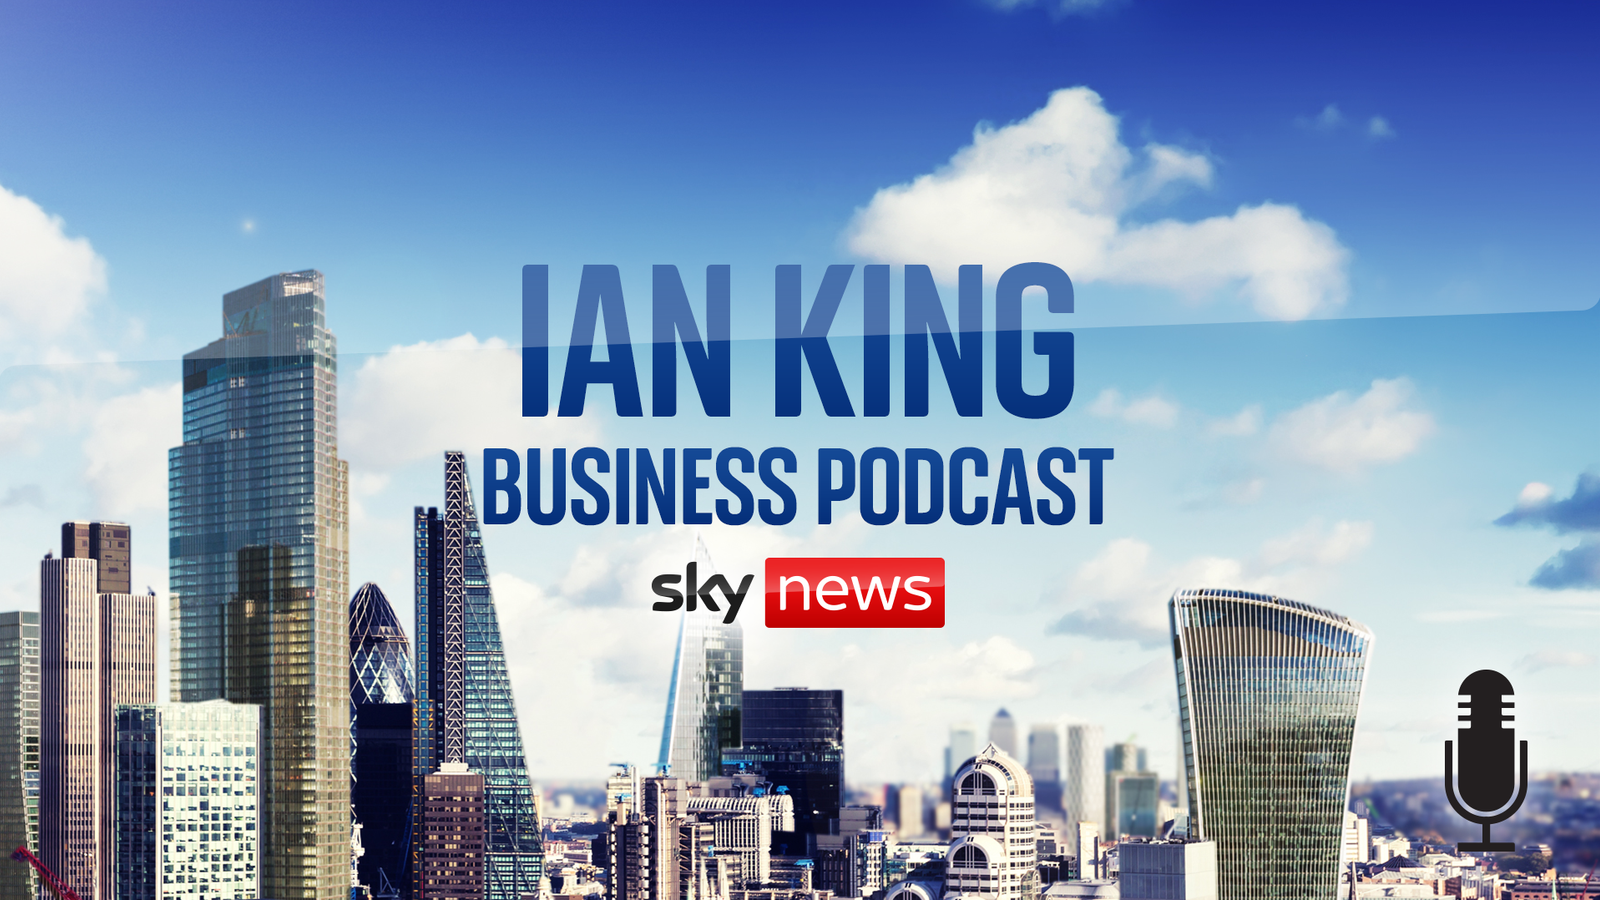 Ian King Business Podcast: The London Stock Exchange, frozen food and Trainline | Business News